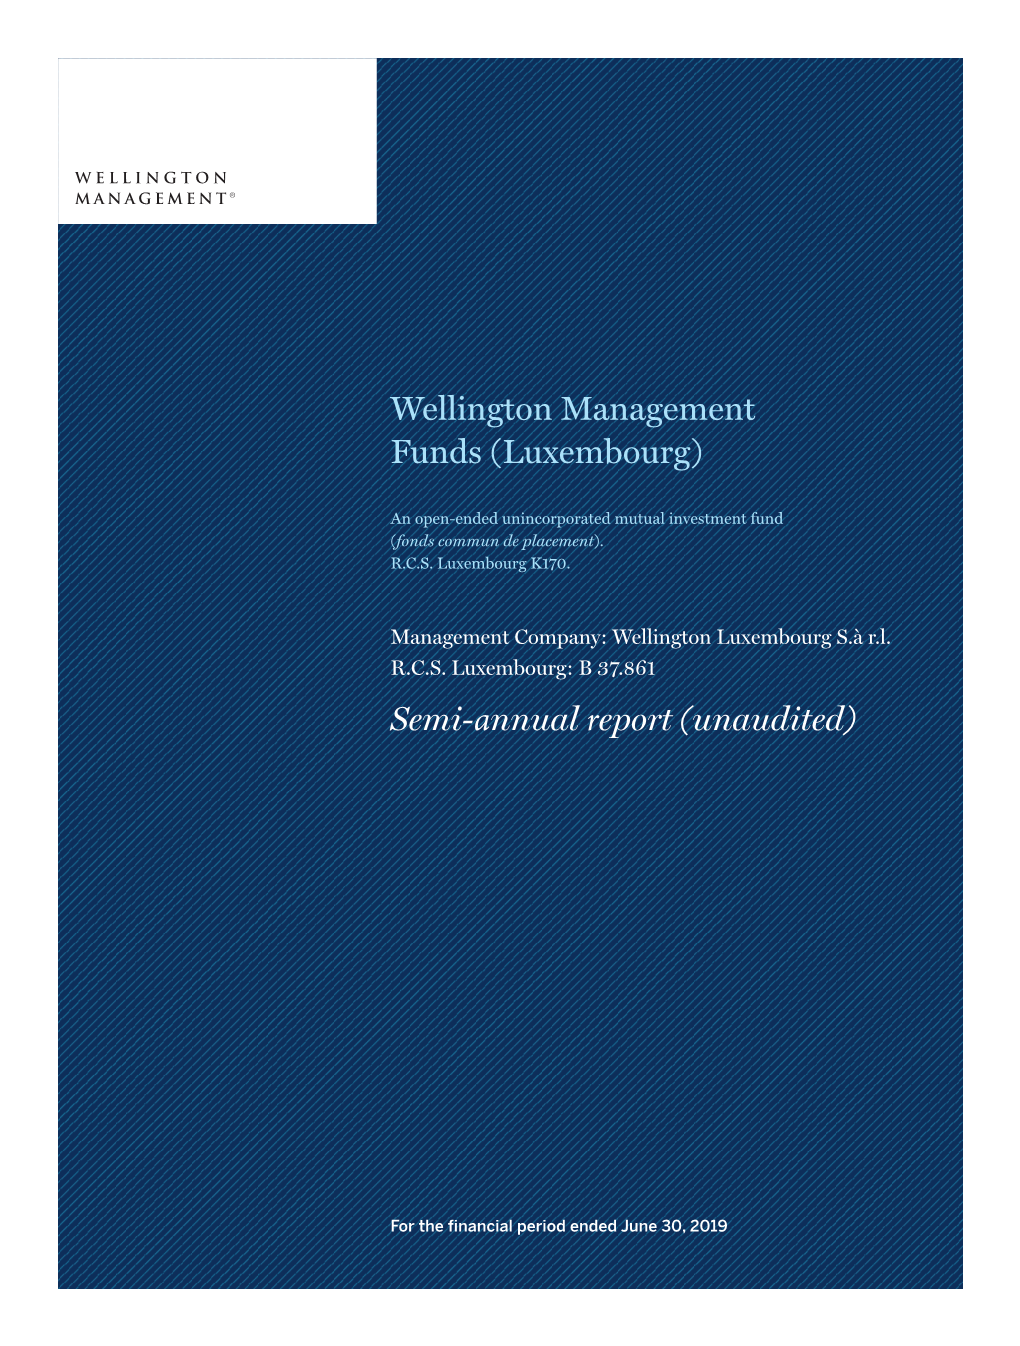 Wellington Management Funds (Luxembourg) Semi-Annual Report Contents June 30, 2019